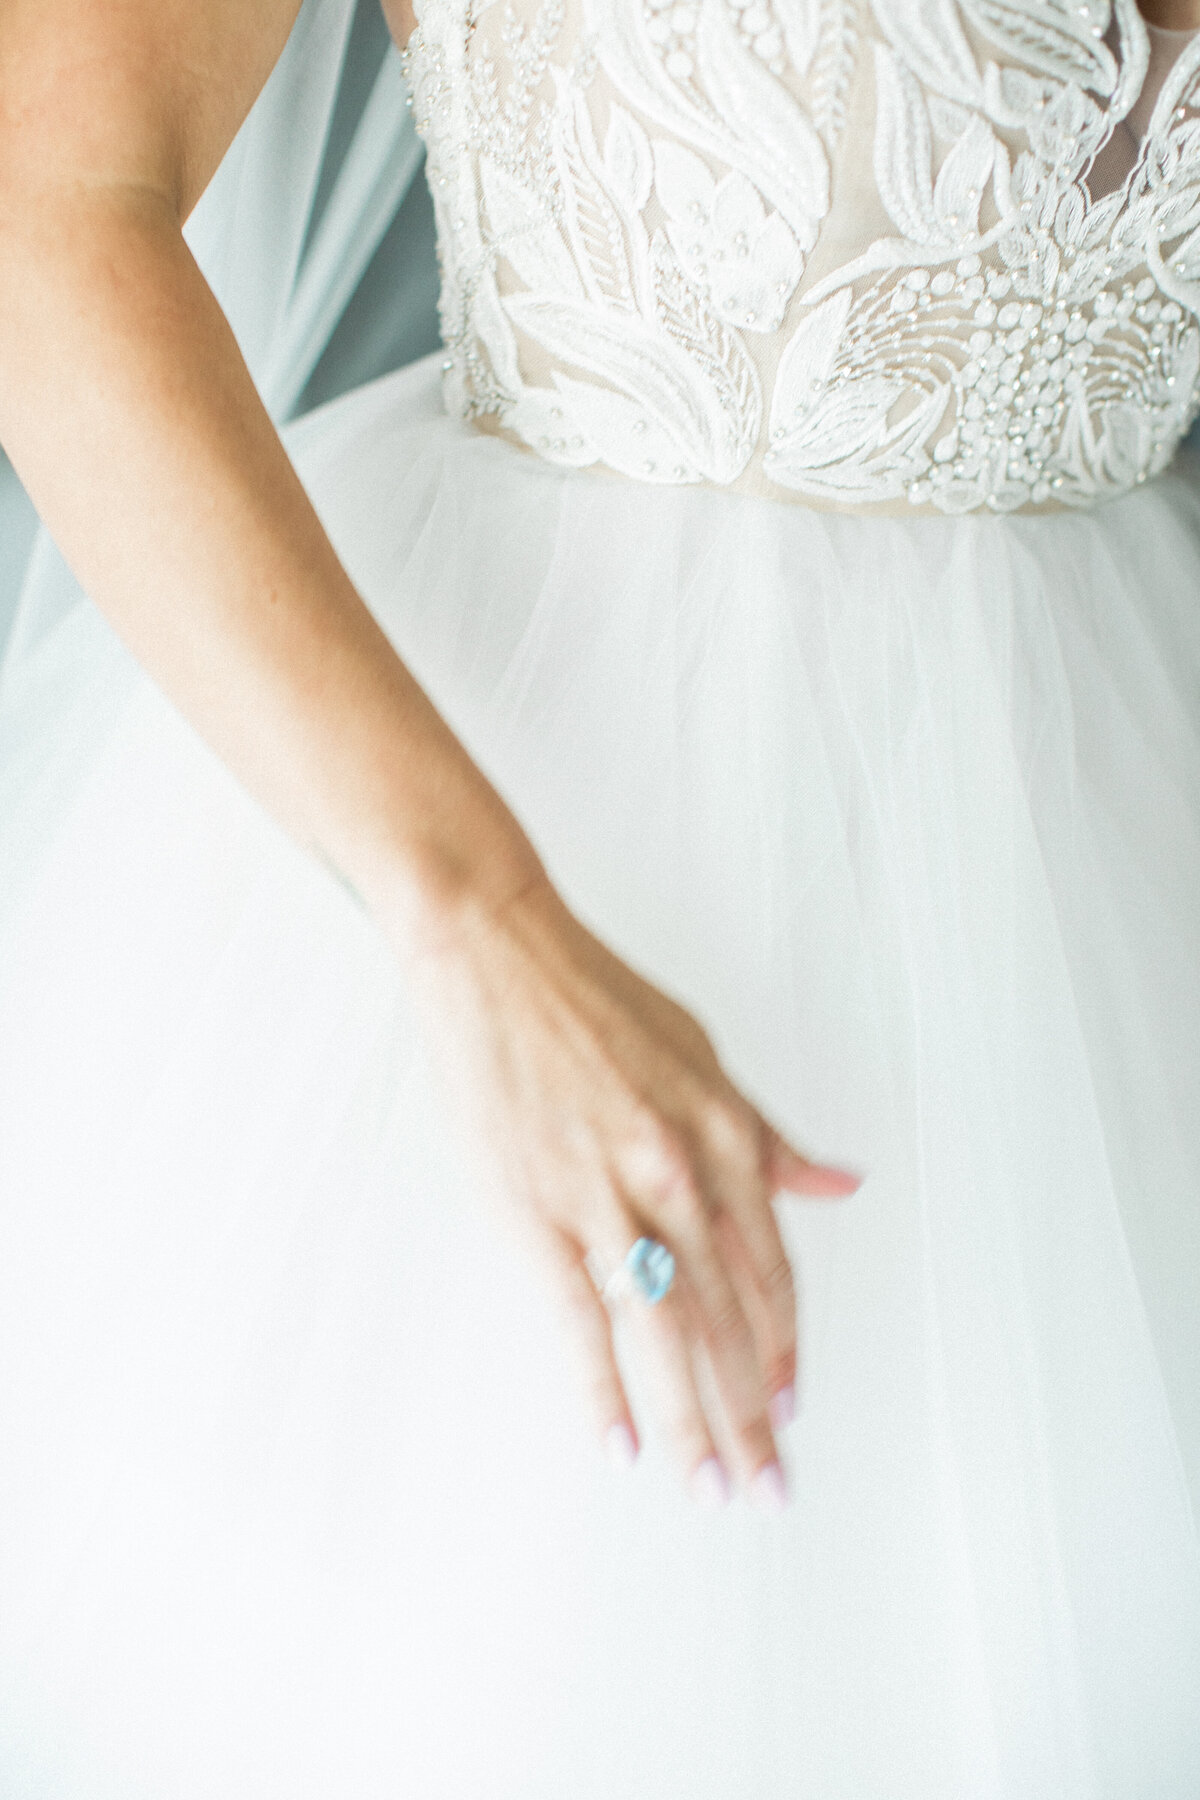 Detail shot of a bride's wedding dress and engagement ring